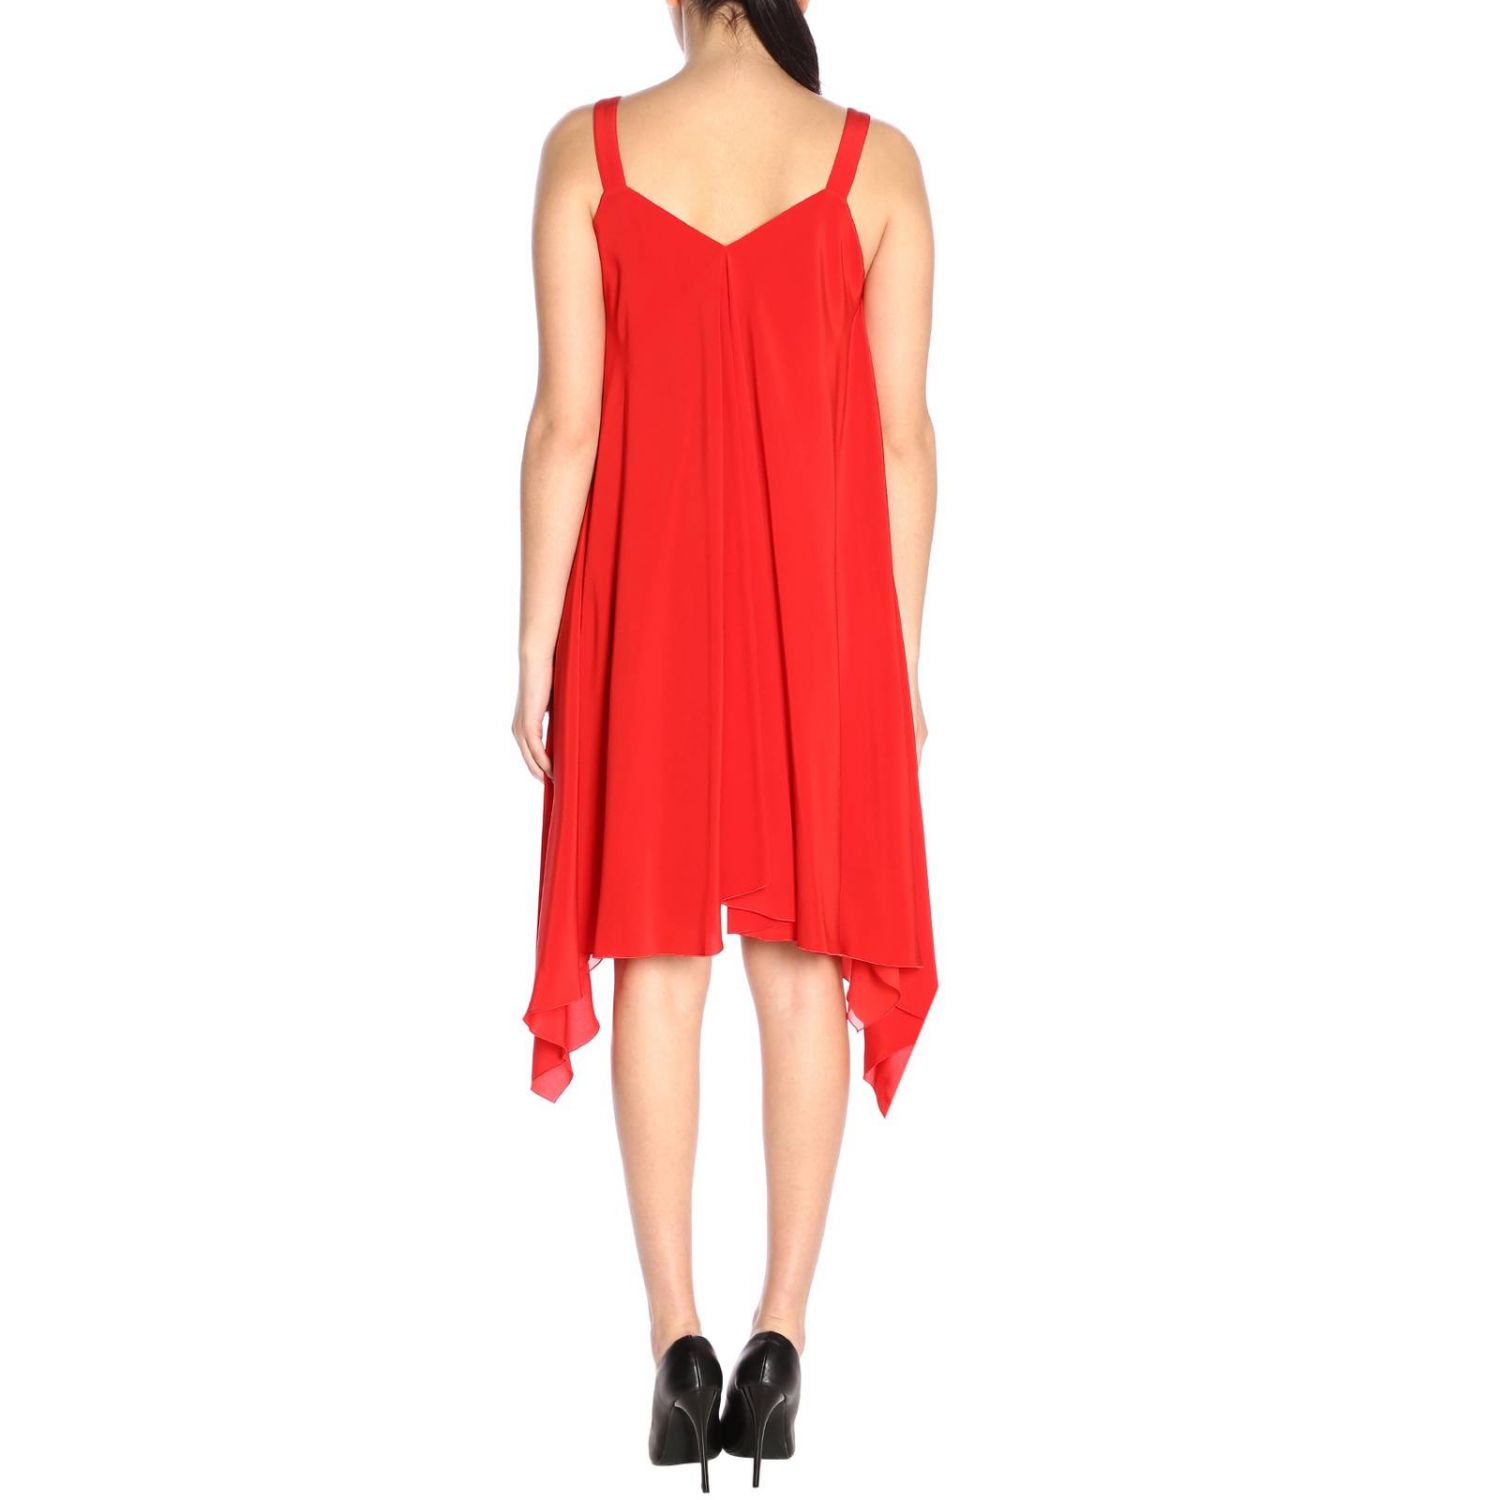 Boutique Moschino Outlet: dress for woman - Red | Boutique Moschino ...